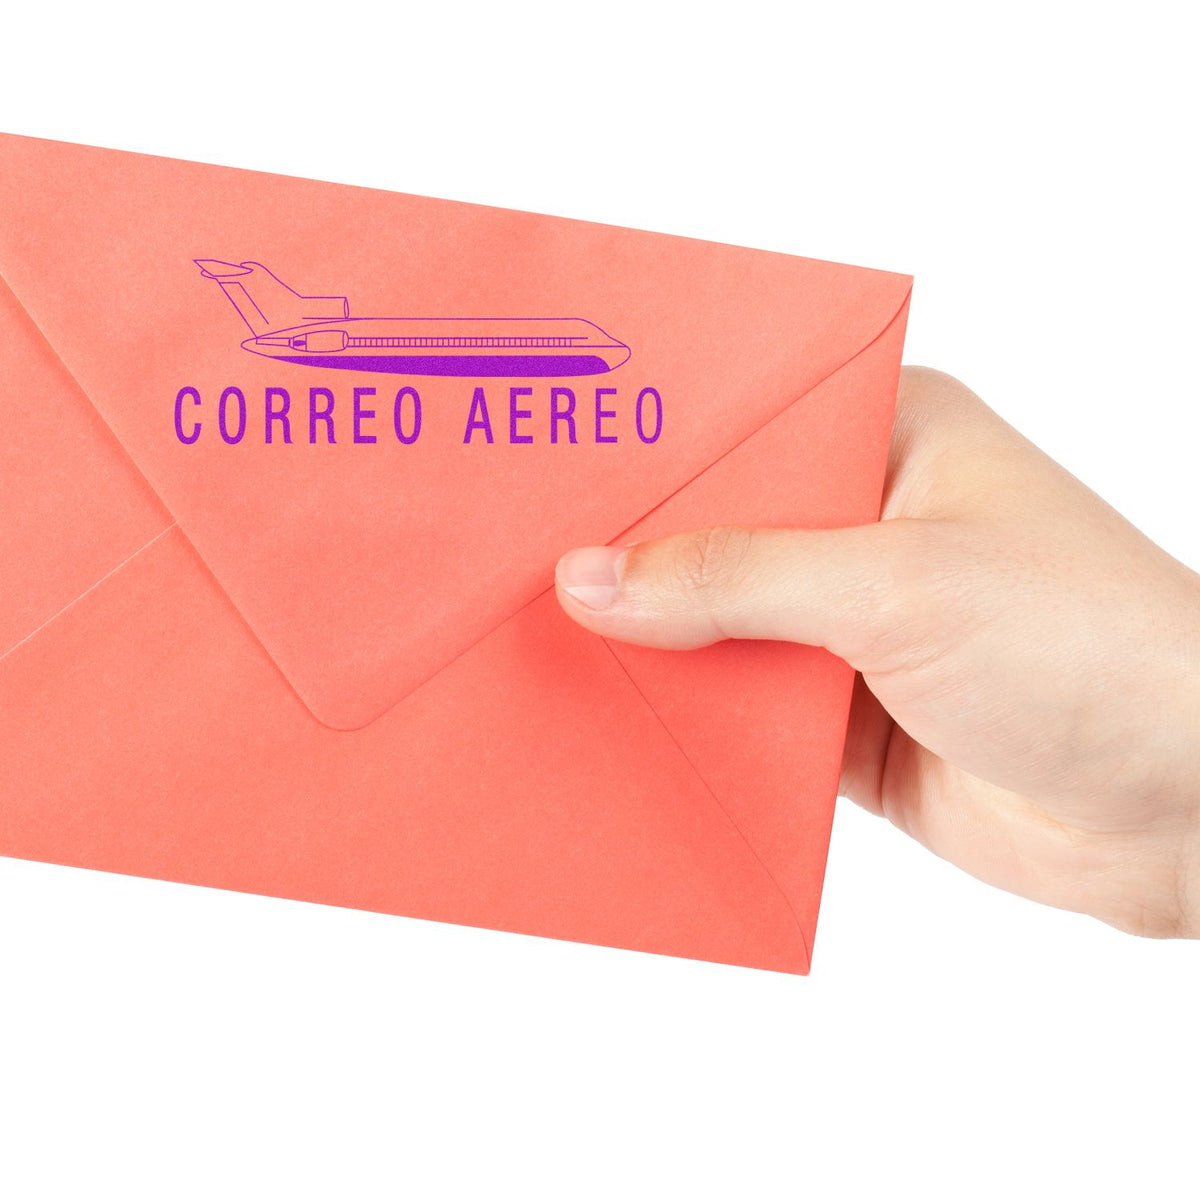 Large Pre-Inked Correo Aero Stamp In Use